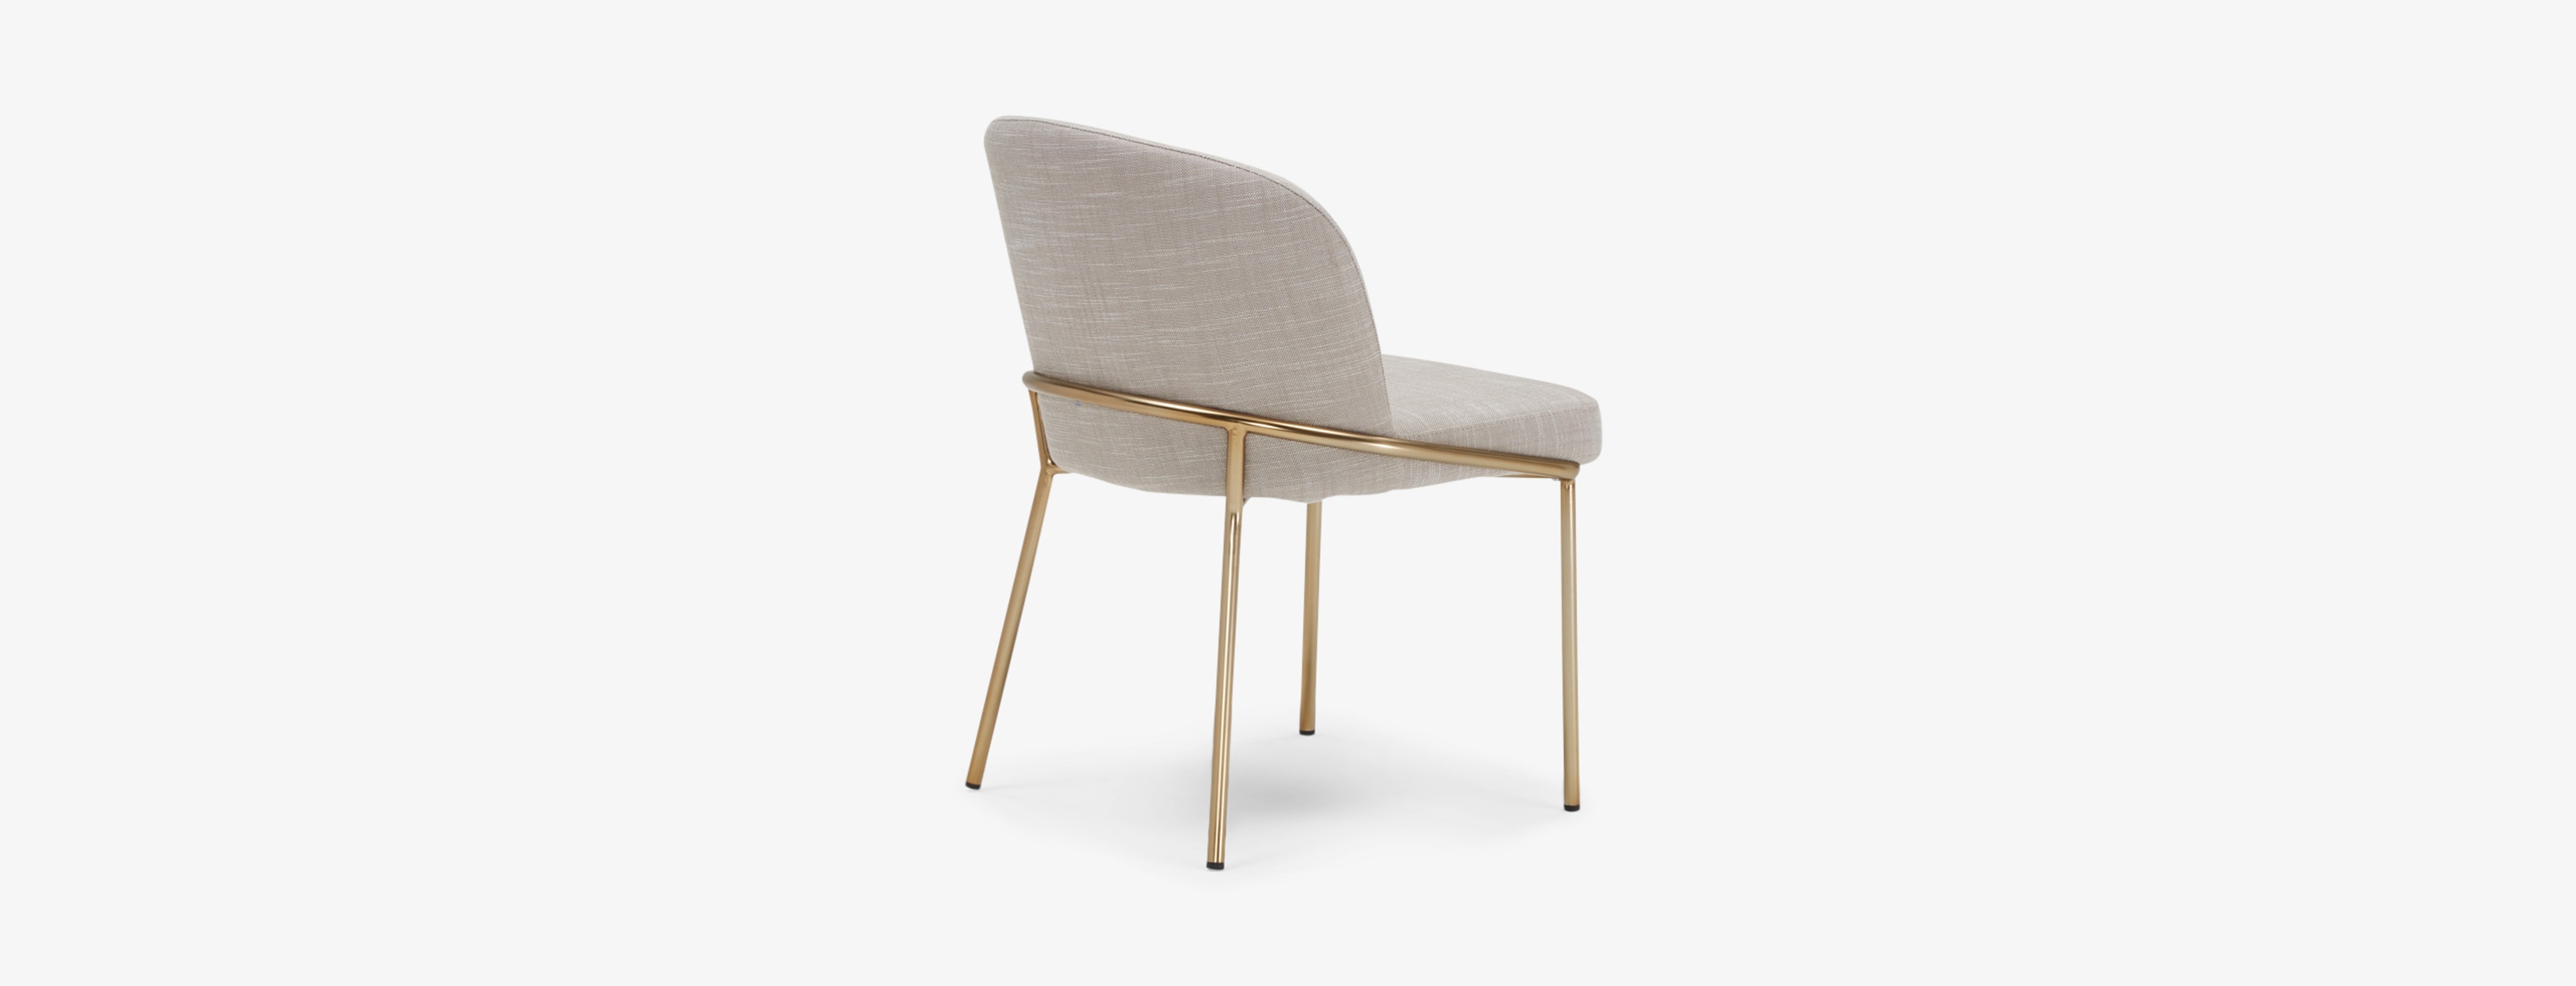 Janie Dining Chair - Image 1